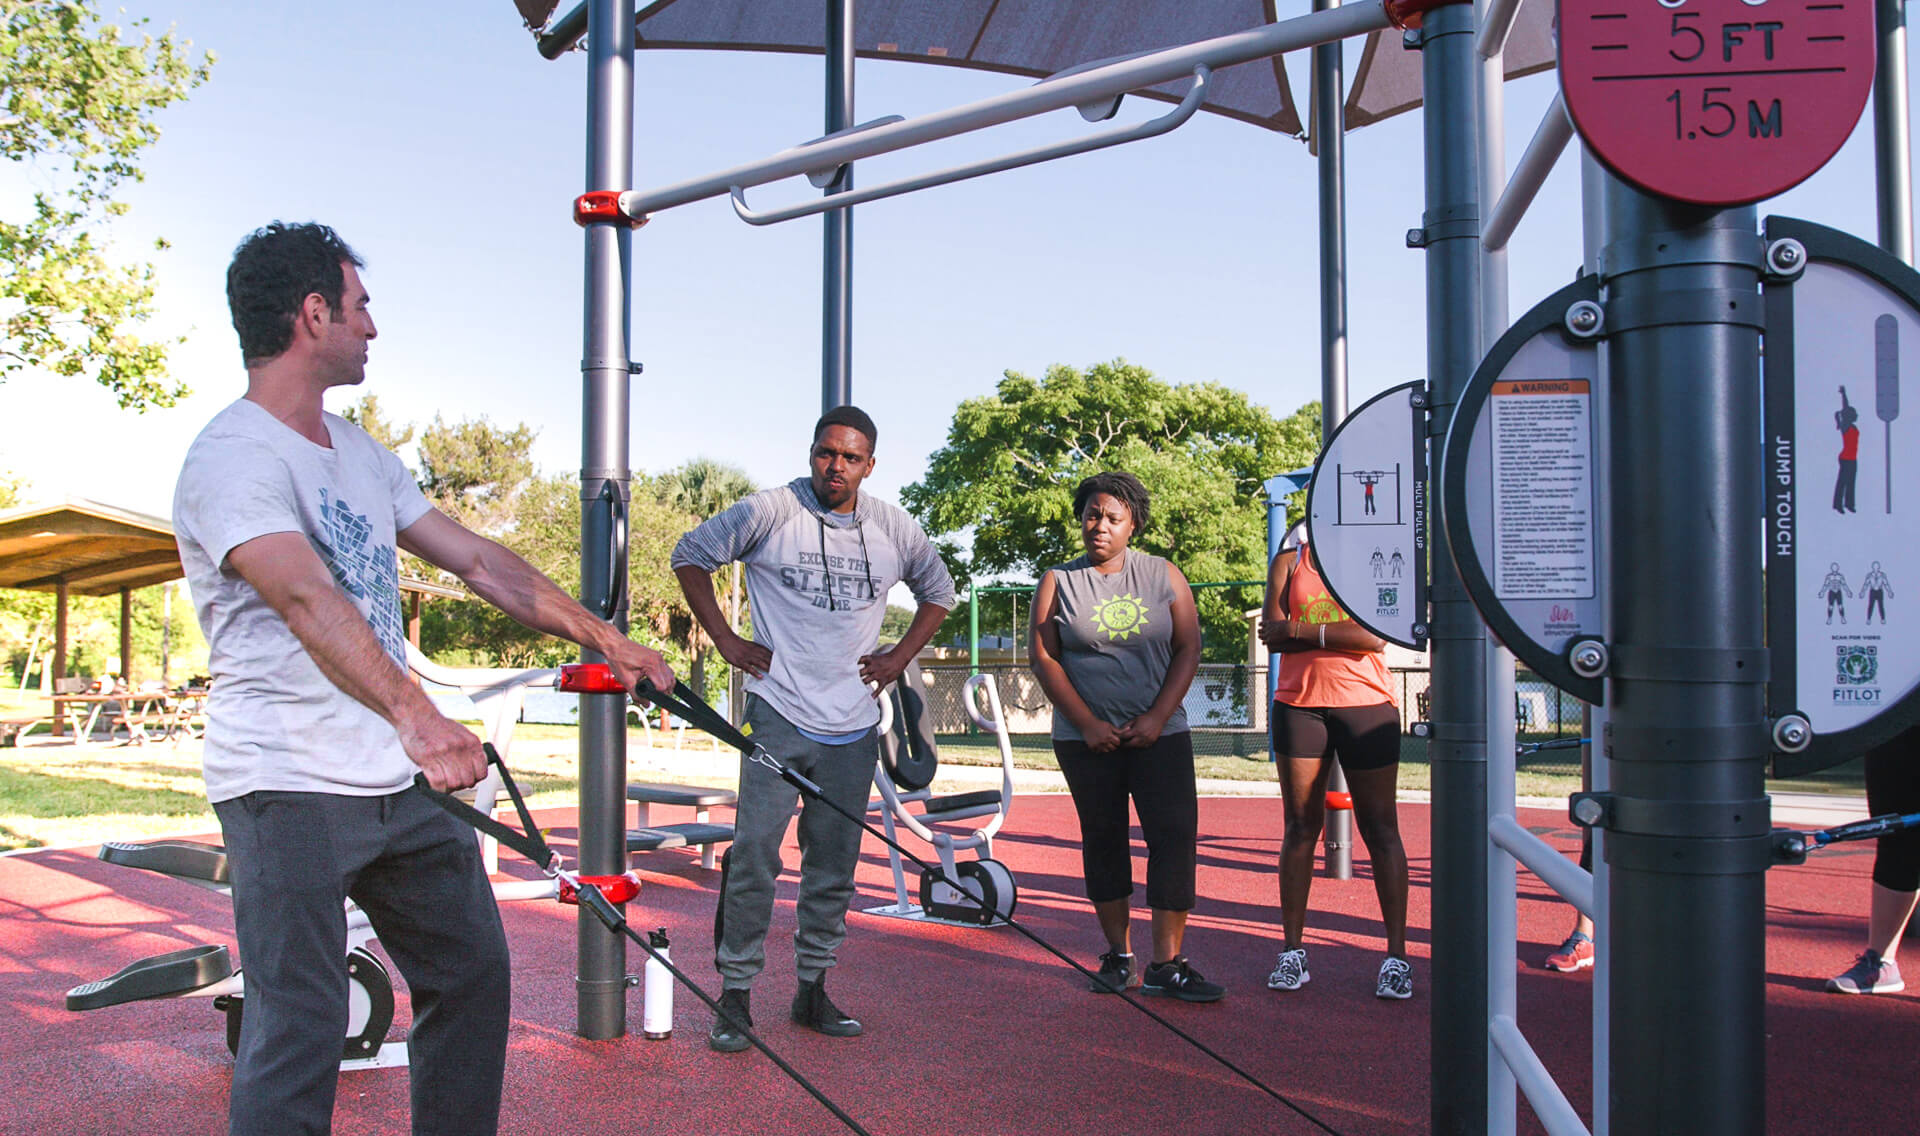 What is a FitLot? – FitLot Outdoor Fitness Parks